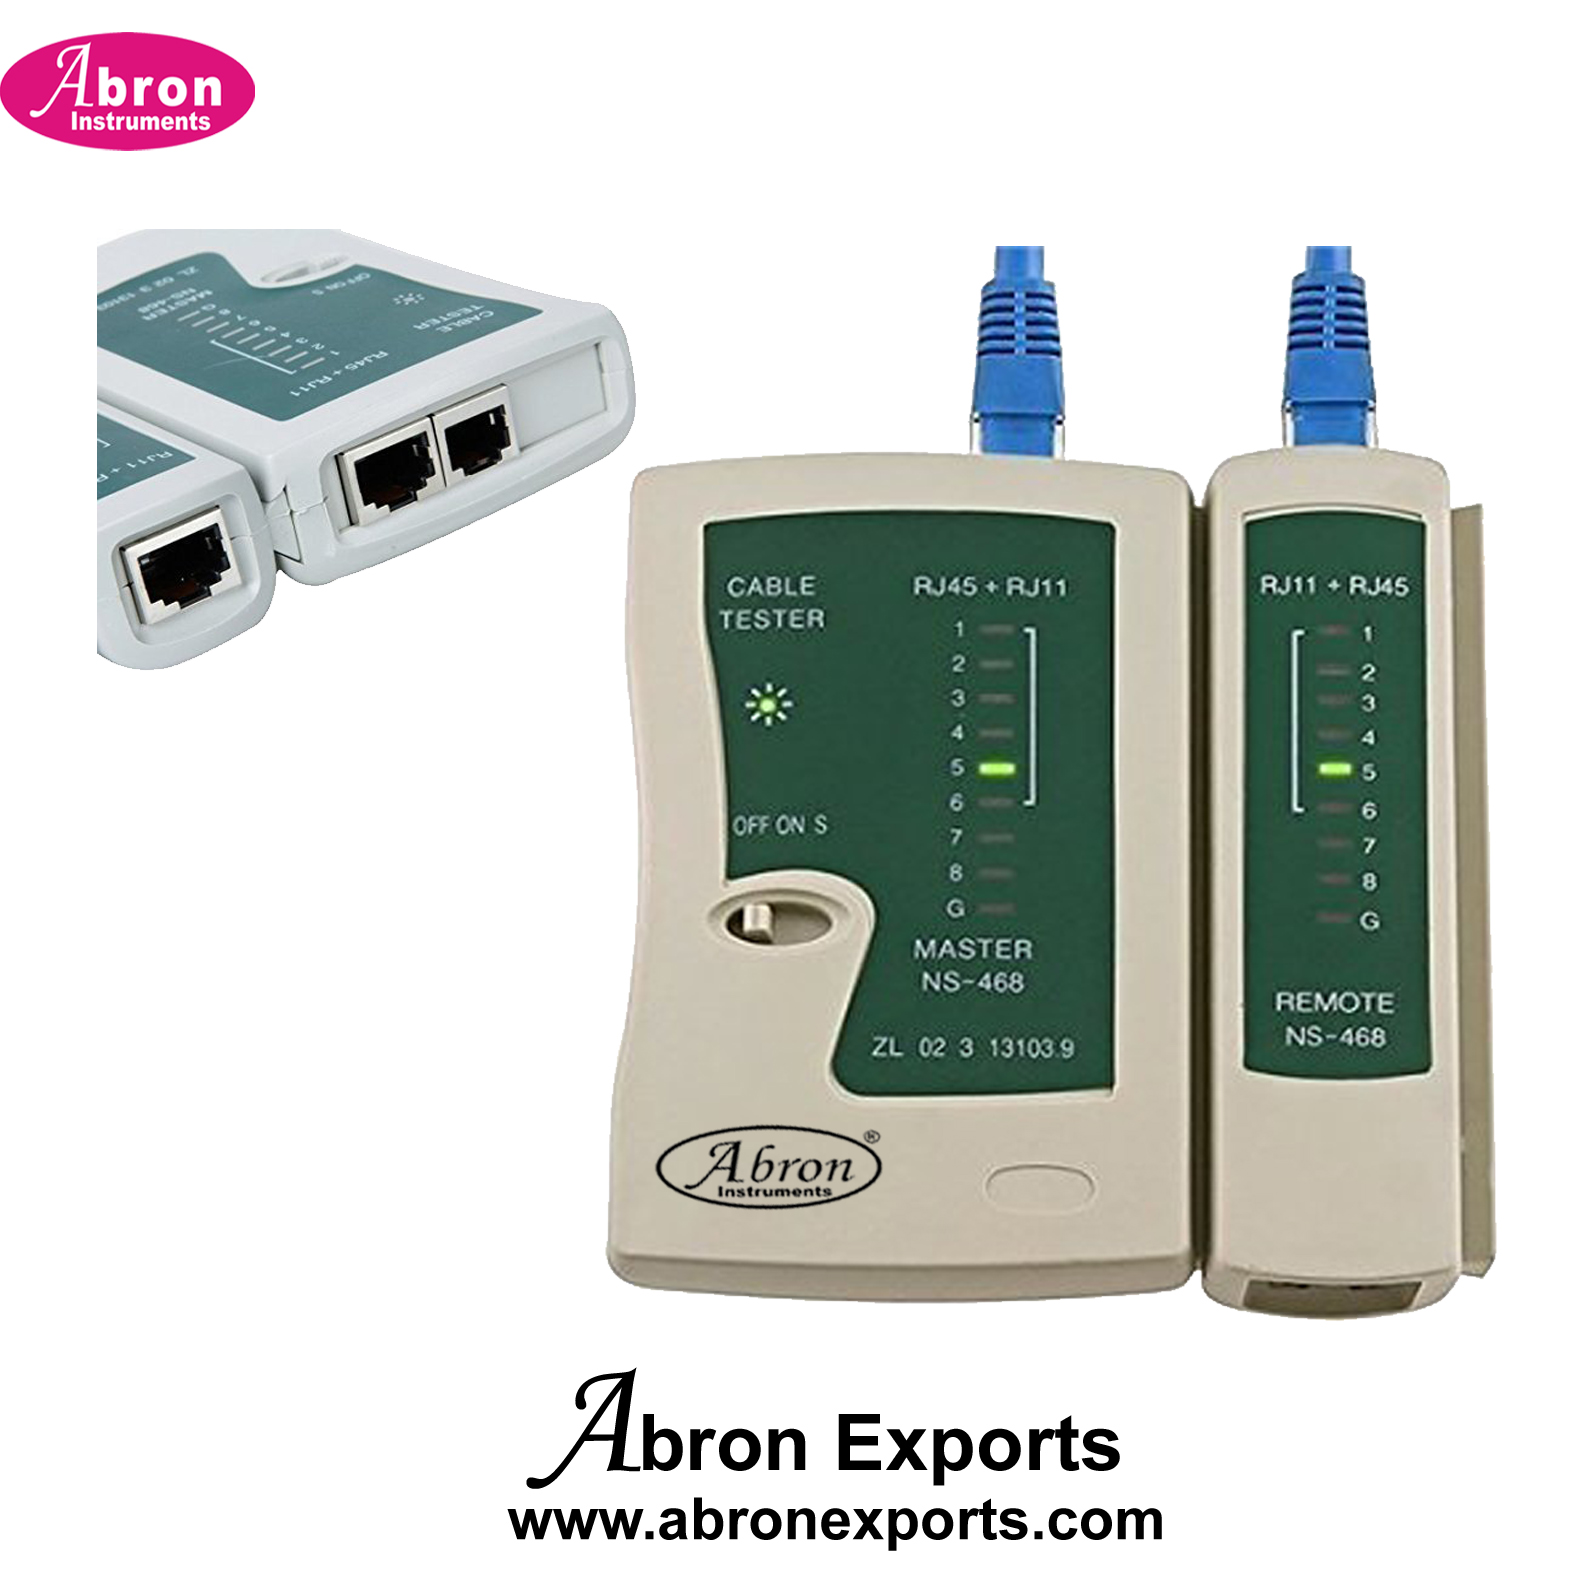 Electronic Component Spare Network Cable Tester for RJ11 Lan Wire Tester Abron AE-1224NCT 